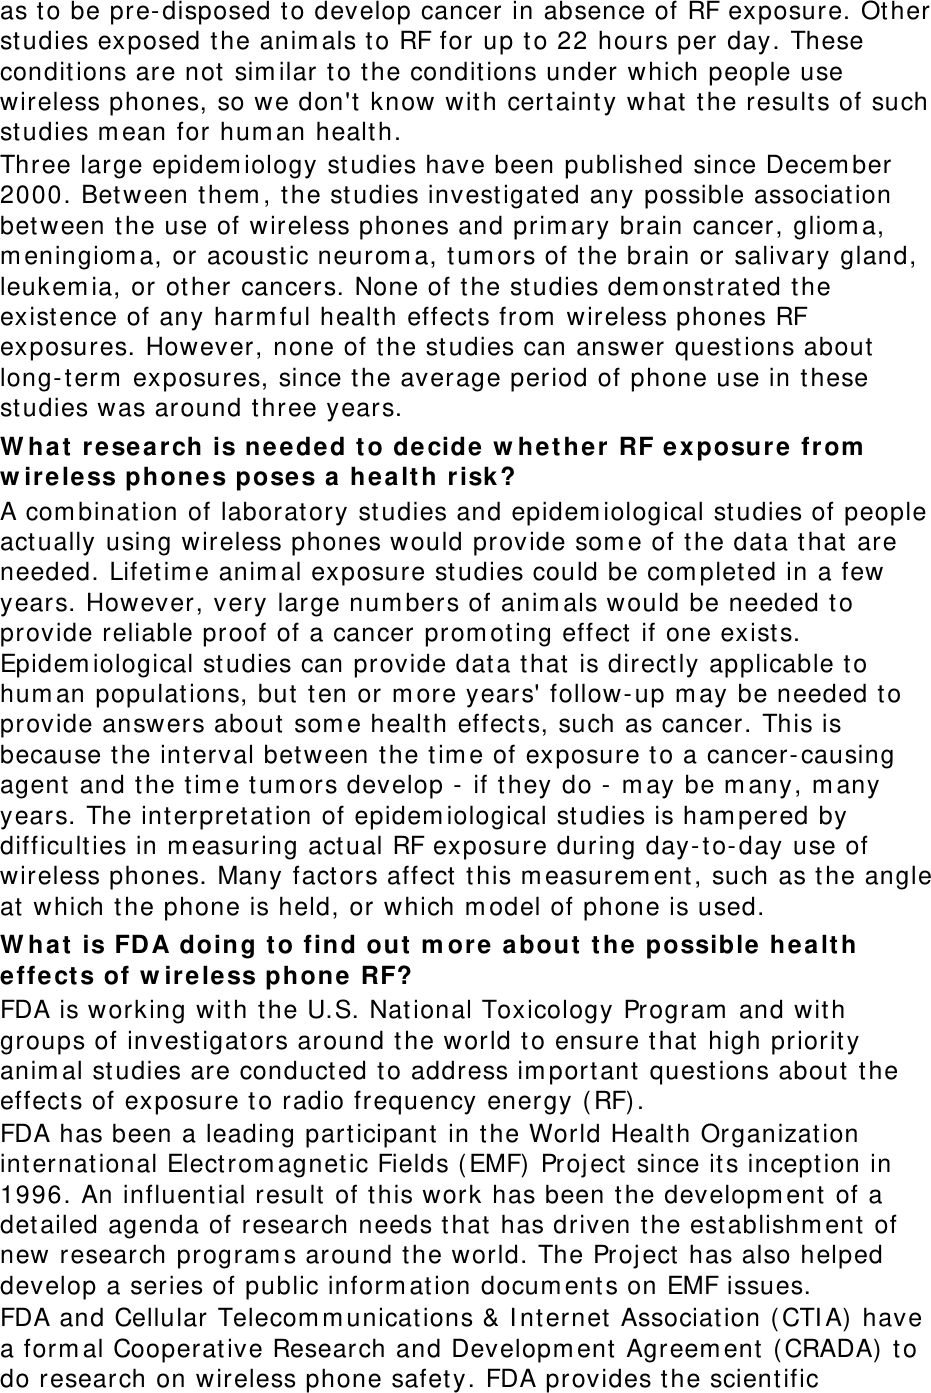 as to be pre- disposed to develop cancer in absence of RF exposure. Ot her studies exposed the anim als to RF for up to 22 hours per day. These condit ions are not sim ilar t o t he condit ions under which people use wireless phones, so we don&apos;t  know wit h certainty what  t he result s of such studies m ean for hum an health. Three large epidem iology studies have been published since Decem ber 2000. Bet ween t hem , t he studies invest igat ed any possible association bet ween t he use of wireless phones and prim ary brain cancer, gliom a, m eningiom a, or acoust ic neurom a, t um ors of the brain or salivary gland, leukem ia, or other cancers. None of t he st udies dem onst rat ed the exist ence of any harm ful healt h effect s from  wireless phones RF exposures. However, none of t he st udies can answer questions about long- t erm  exposures, since t he average period of phone use in t hese studies was around t hree years. W h a t  r e se a rch is needed t o decide w het her RF ex posure from  w ire le ss phones pose s a hea lt h risk ? A com binat ion of laborat ory st udies and epidem iological st udies of people act ually using wireless phones would provide som e of t he dat a t hat  are needed. Lifetim e anim al exposure st udies could be com plet ed in a few years. However, very large num bers of anim als would be needed t o provide reliable proof of a cancer prom ot ing effect if one exist s. Epidem iological st udies can provide dat a that  is direct ly applicable t o hum an populat ions, but t en or m ore years&apos; follow- up m ay be needed to provide answers about som e healt h effect s, such as cancer. This is because t he interval between t he t im e of exposure t o a cancer-causing agent  and the t im e t um ors develop -  if t hey do -  m ay be m any, m any years. The int erpret at ion of epidem iological st udies is ham pered by difficult ies in m easuring act ual RF exposure during day-t o- day use of wireless phones. Many factors affect  t his m easurem ent , such as t he angle at which t he phone is held, or which m odel of phone is used. W h a t  is FDA doing t o find out  m or e  a bout  t he possible healt h effect s of w ireless phone RF? FDA is working wit h t he U.S. Nat ional Toxicology Program  and wit h groups of investigat ors around t he world to ensure t hat  high priorit y anim al st udies are conduct ed t o address im port ant questions about the effects of exposure t o radio frequency energy ( RF) . FDA has been a leading part icipant in the World Healt h Organization int ernat ional Elect rom agnet ic Fields ( EMF) Proj ect  since it s incept ion in 1996. An influent ial result  of t his work has been t he developm ent  of a det ailed agenda of research needs t hat  has driven t he establishm ent of new research program s around the world. The Proj ect  has also helped develop a series of public inform at ion docum ent s on EMF issues. FDA and Cellular Telecom m unicat ions &amp; I nt ernet  Associat ion (CTI A)  have a form al Cooperat ive Research and Developm ent  Agreem ent  ( CRADA)  t o do research on wireless phone safet y. FDA provides t he scient ific 